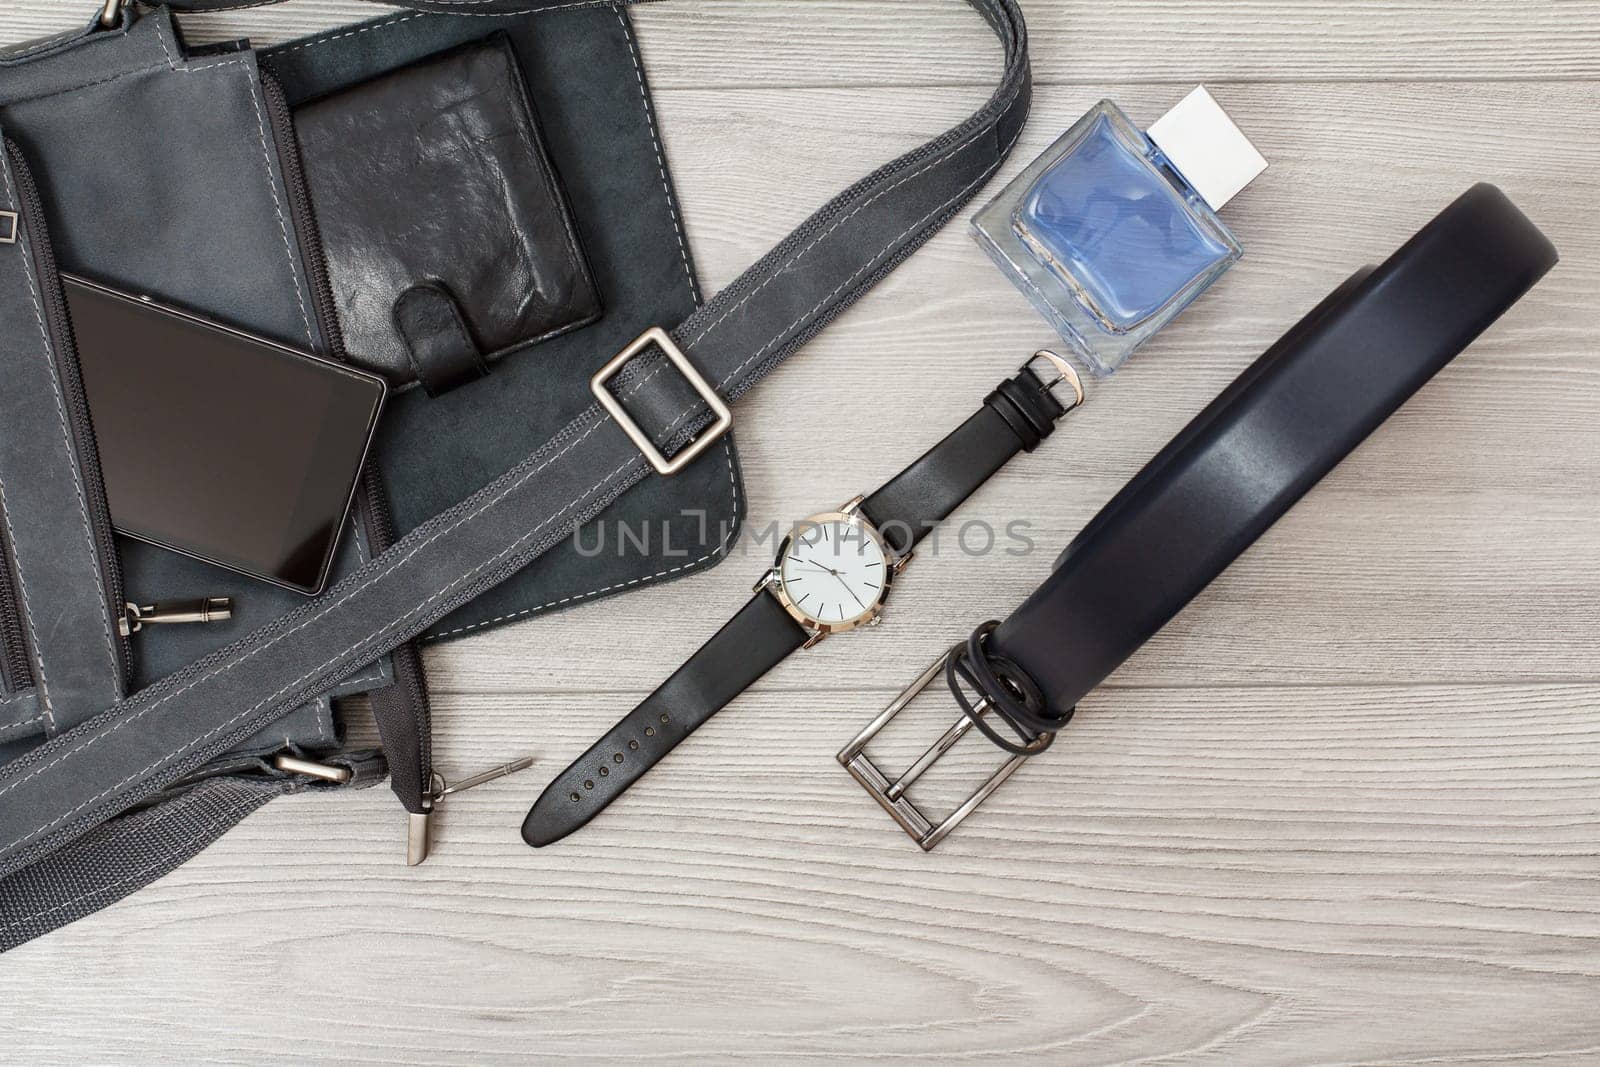 Leather shoulder bag for men with mobile phone and wallet on it, wristwatch, men's cologne and belt for men with gray wooden background. Men's accessories. Top view.